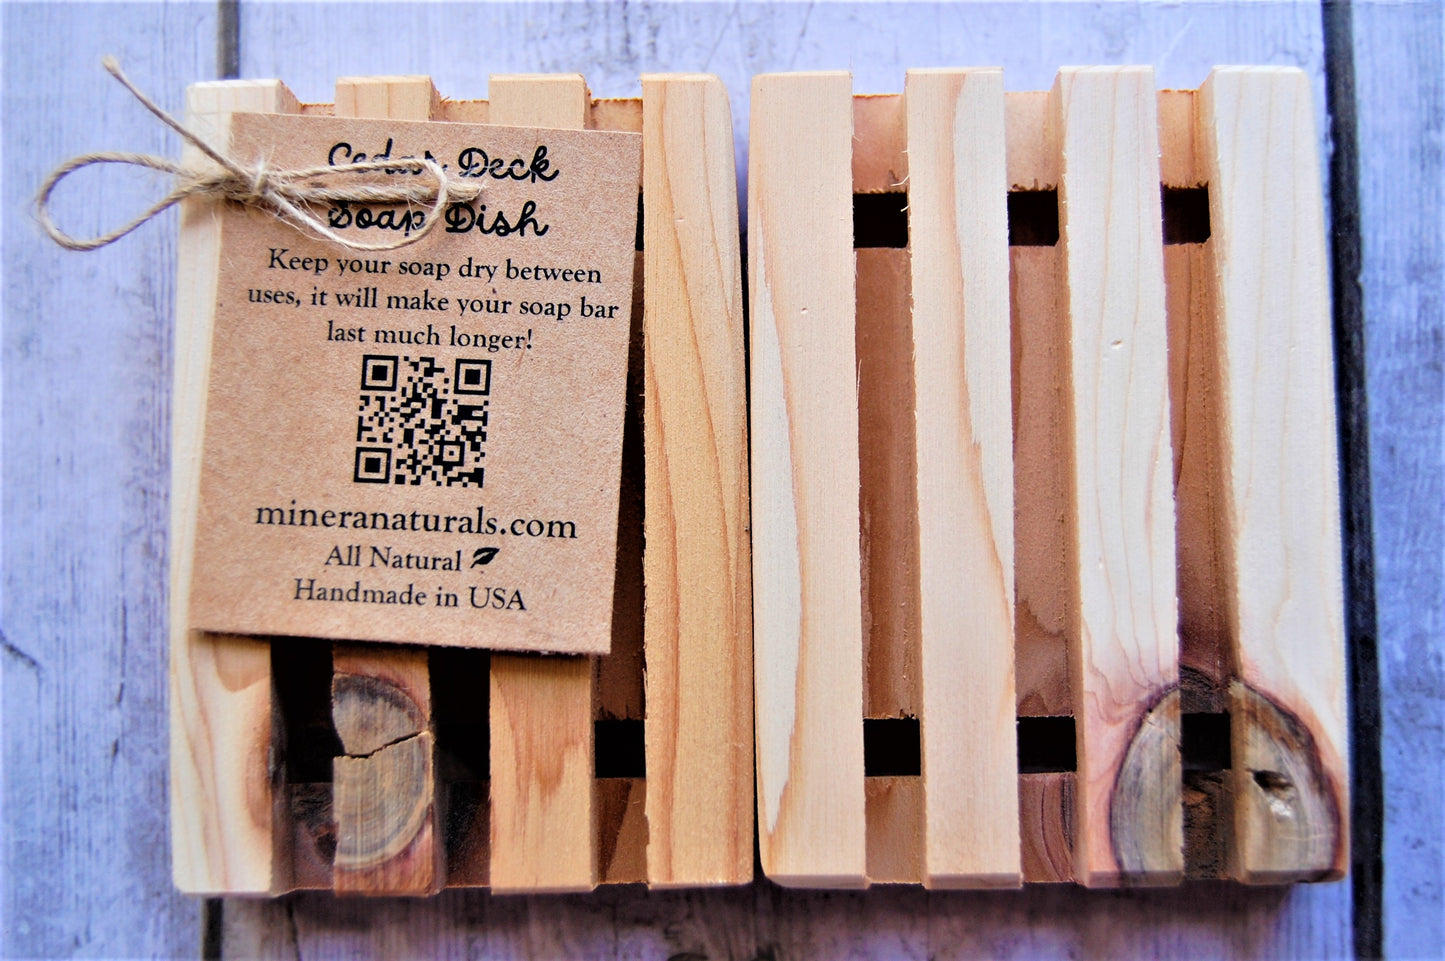 Rustic Cedar Soap Deck with natural imperfections